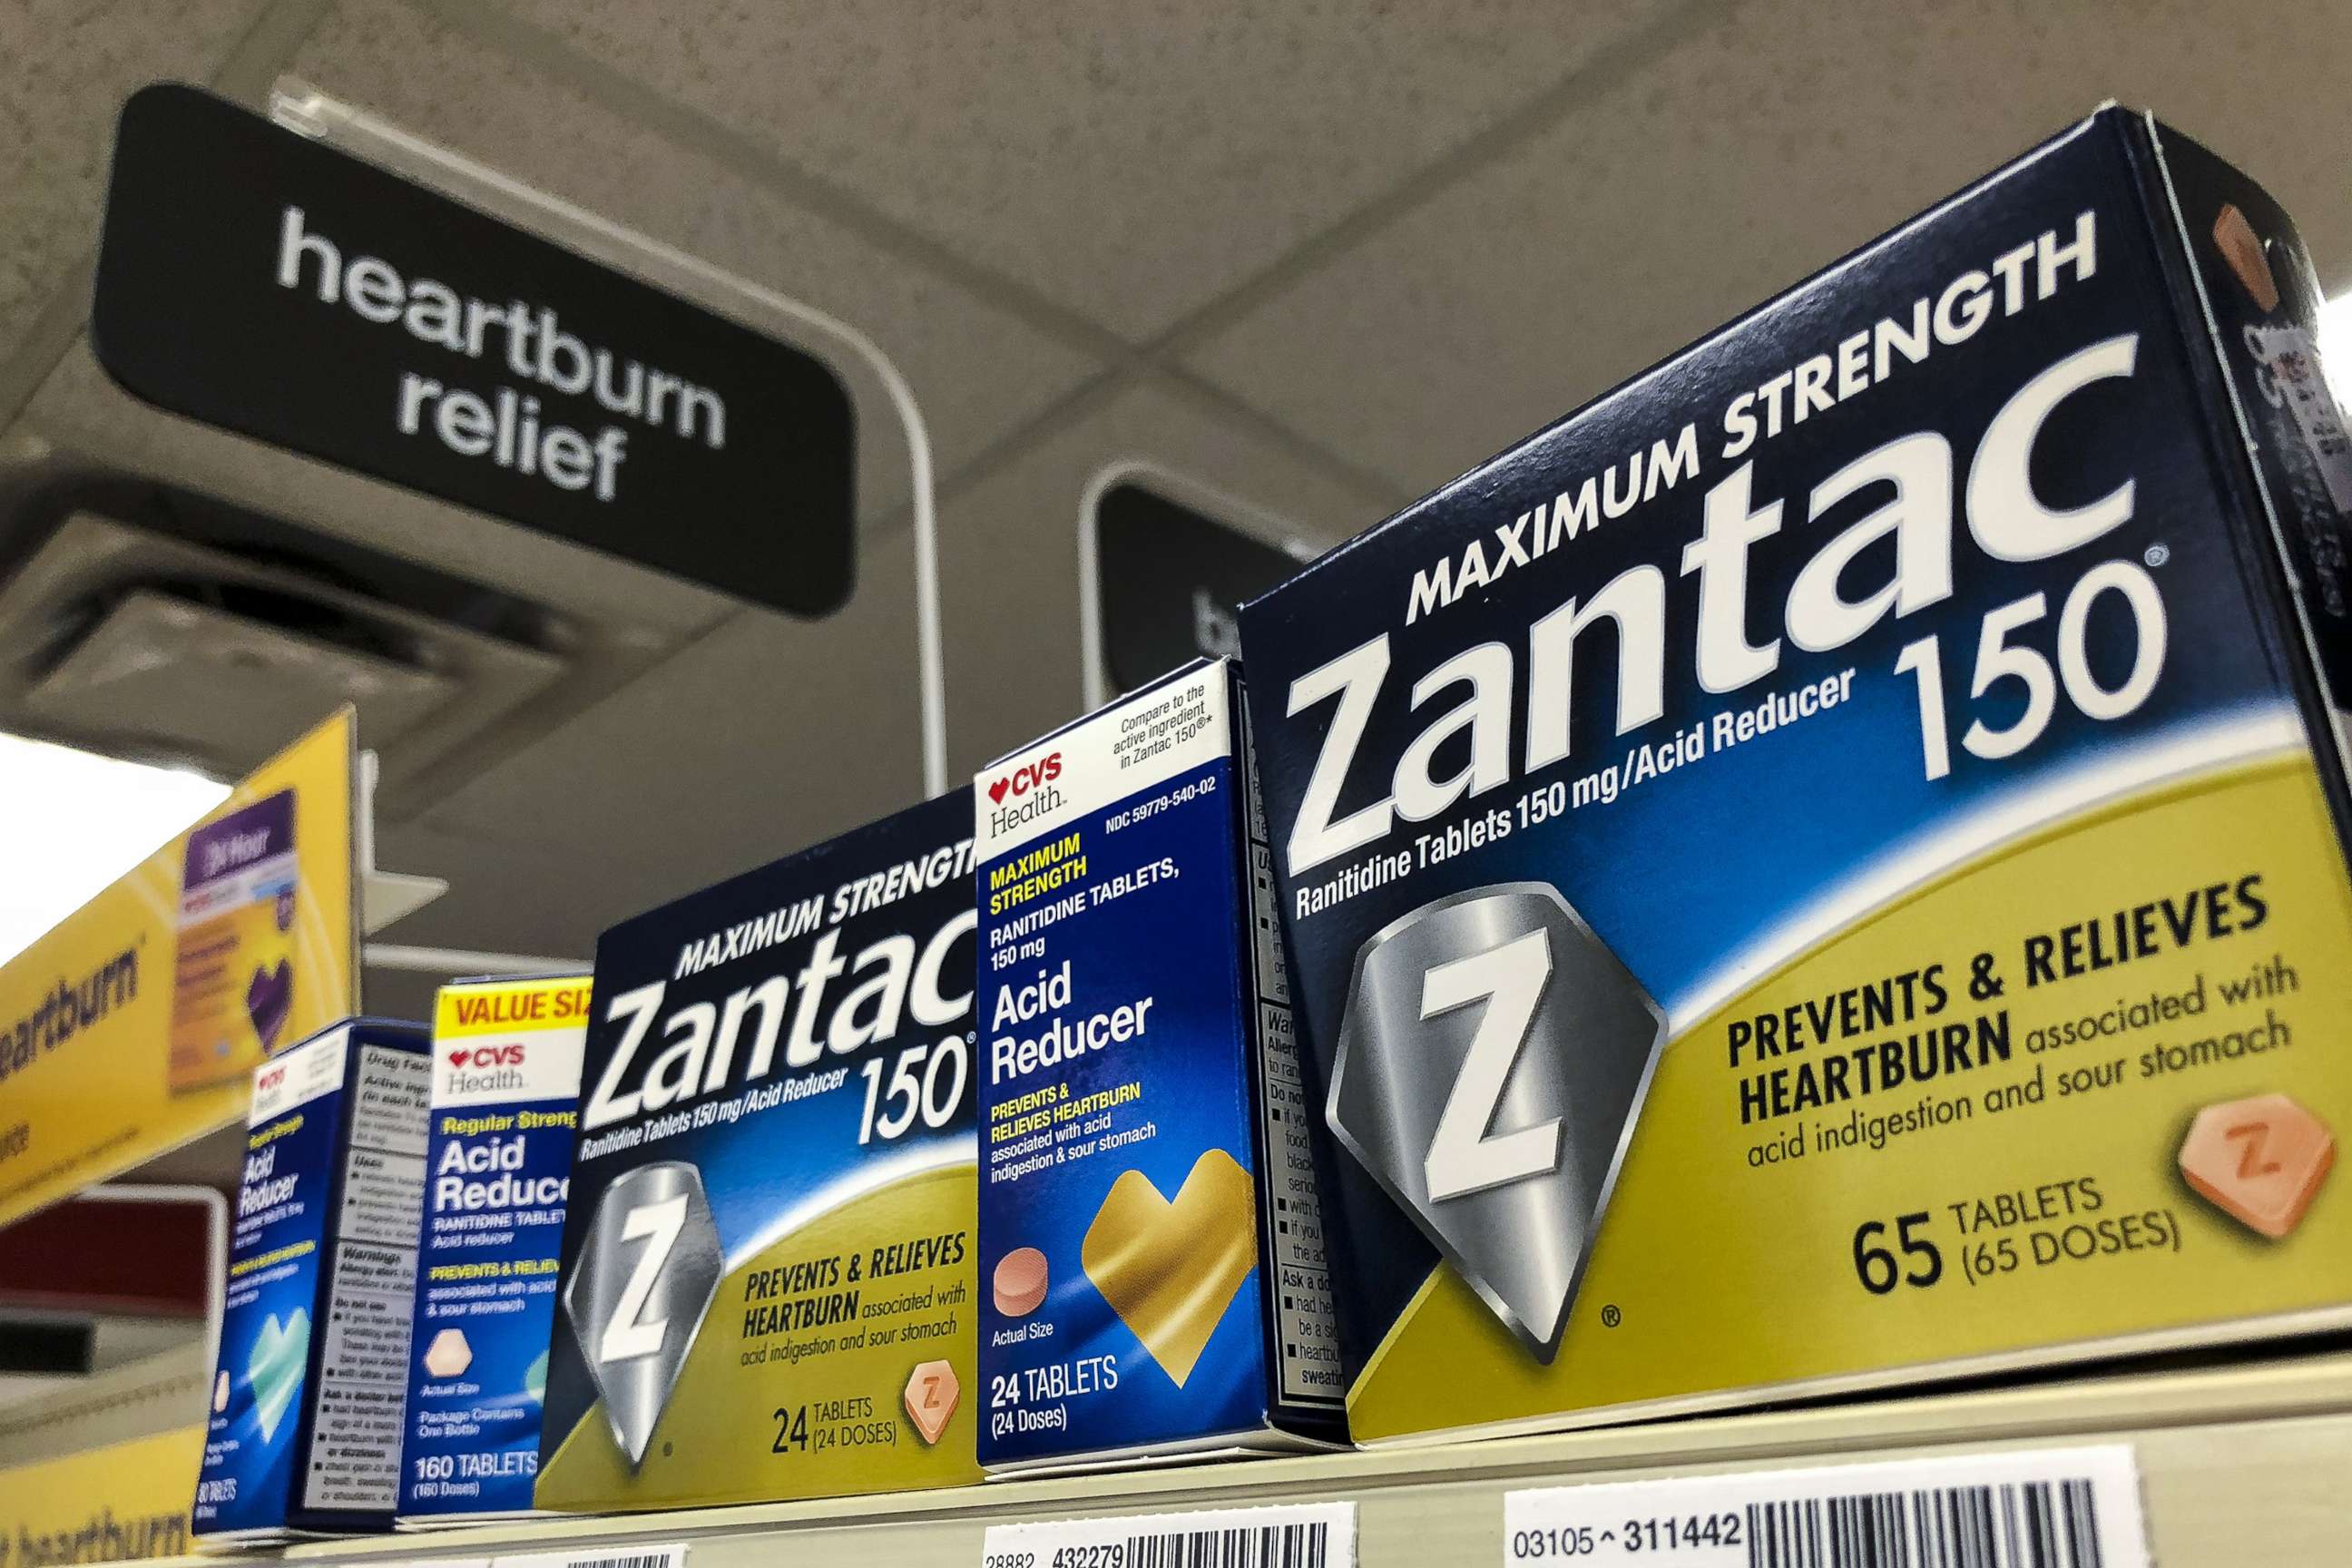 PHOTO: Packages of Zantac, a popular medication which decreases stomach acid production and prevents heartburn, sit on a shelf at a drugstore, Sept. 19, 2019 in New York City.